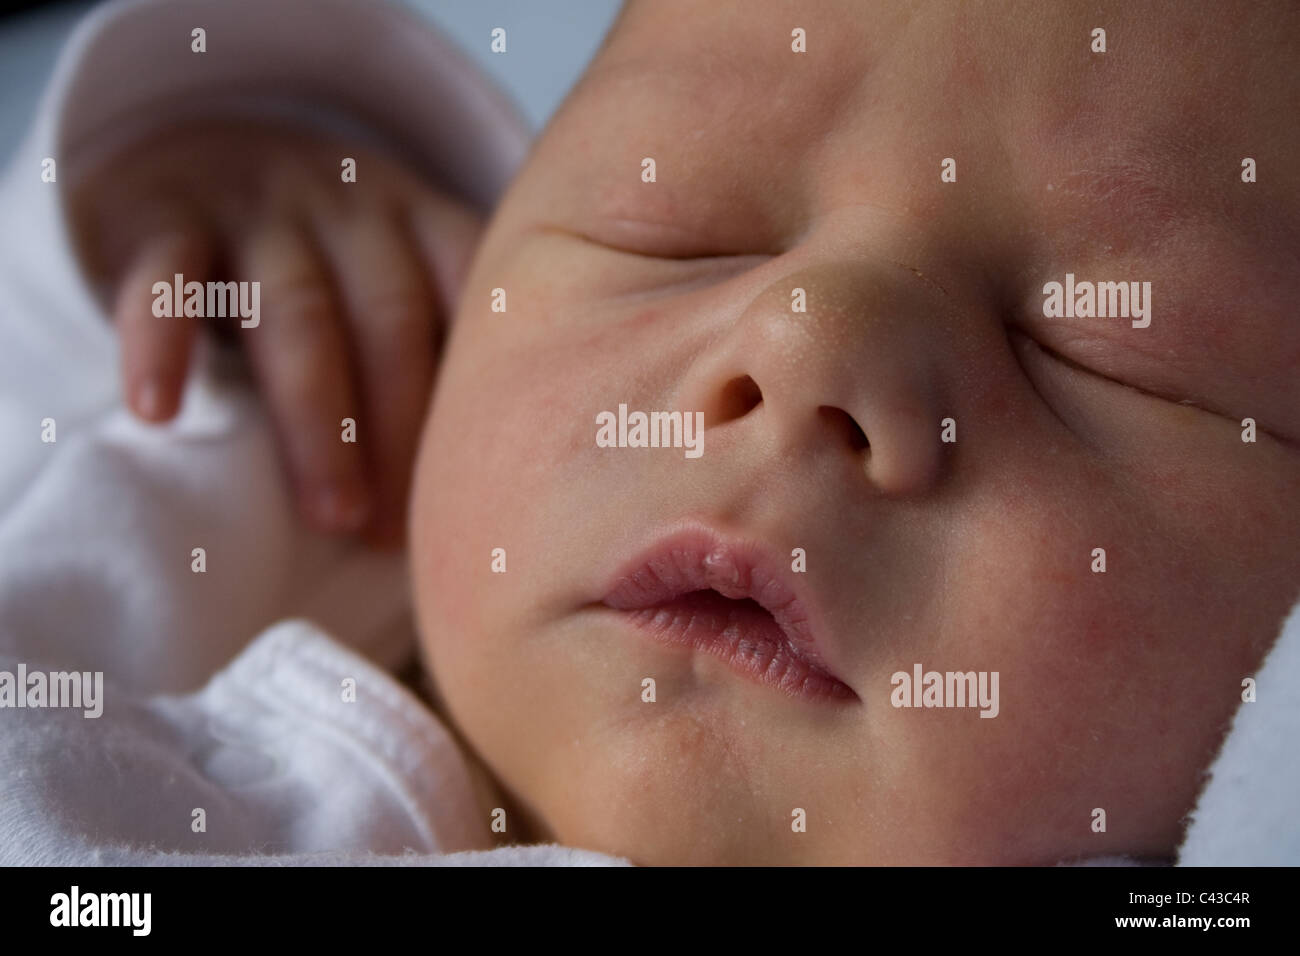 4 day old baby sleeps peacefully at home, with hand poised in the air Stock Photo